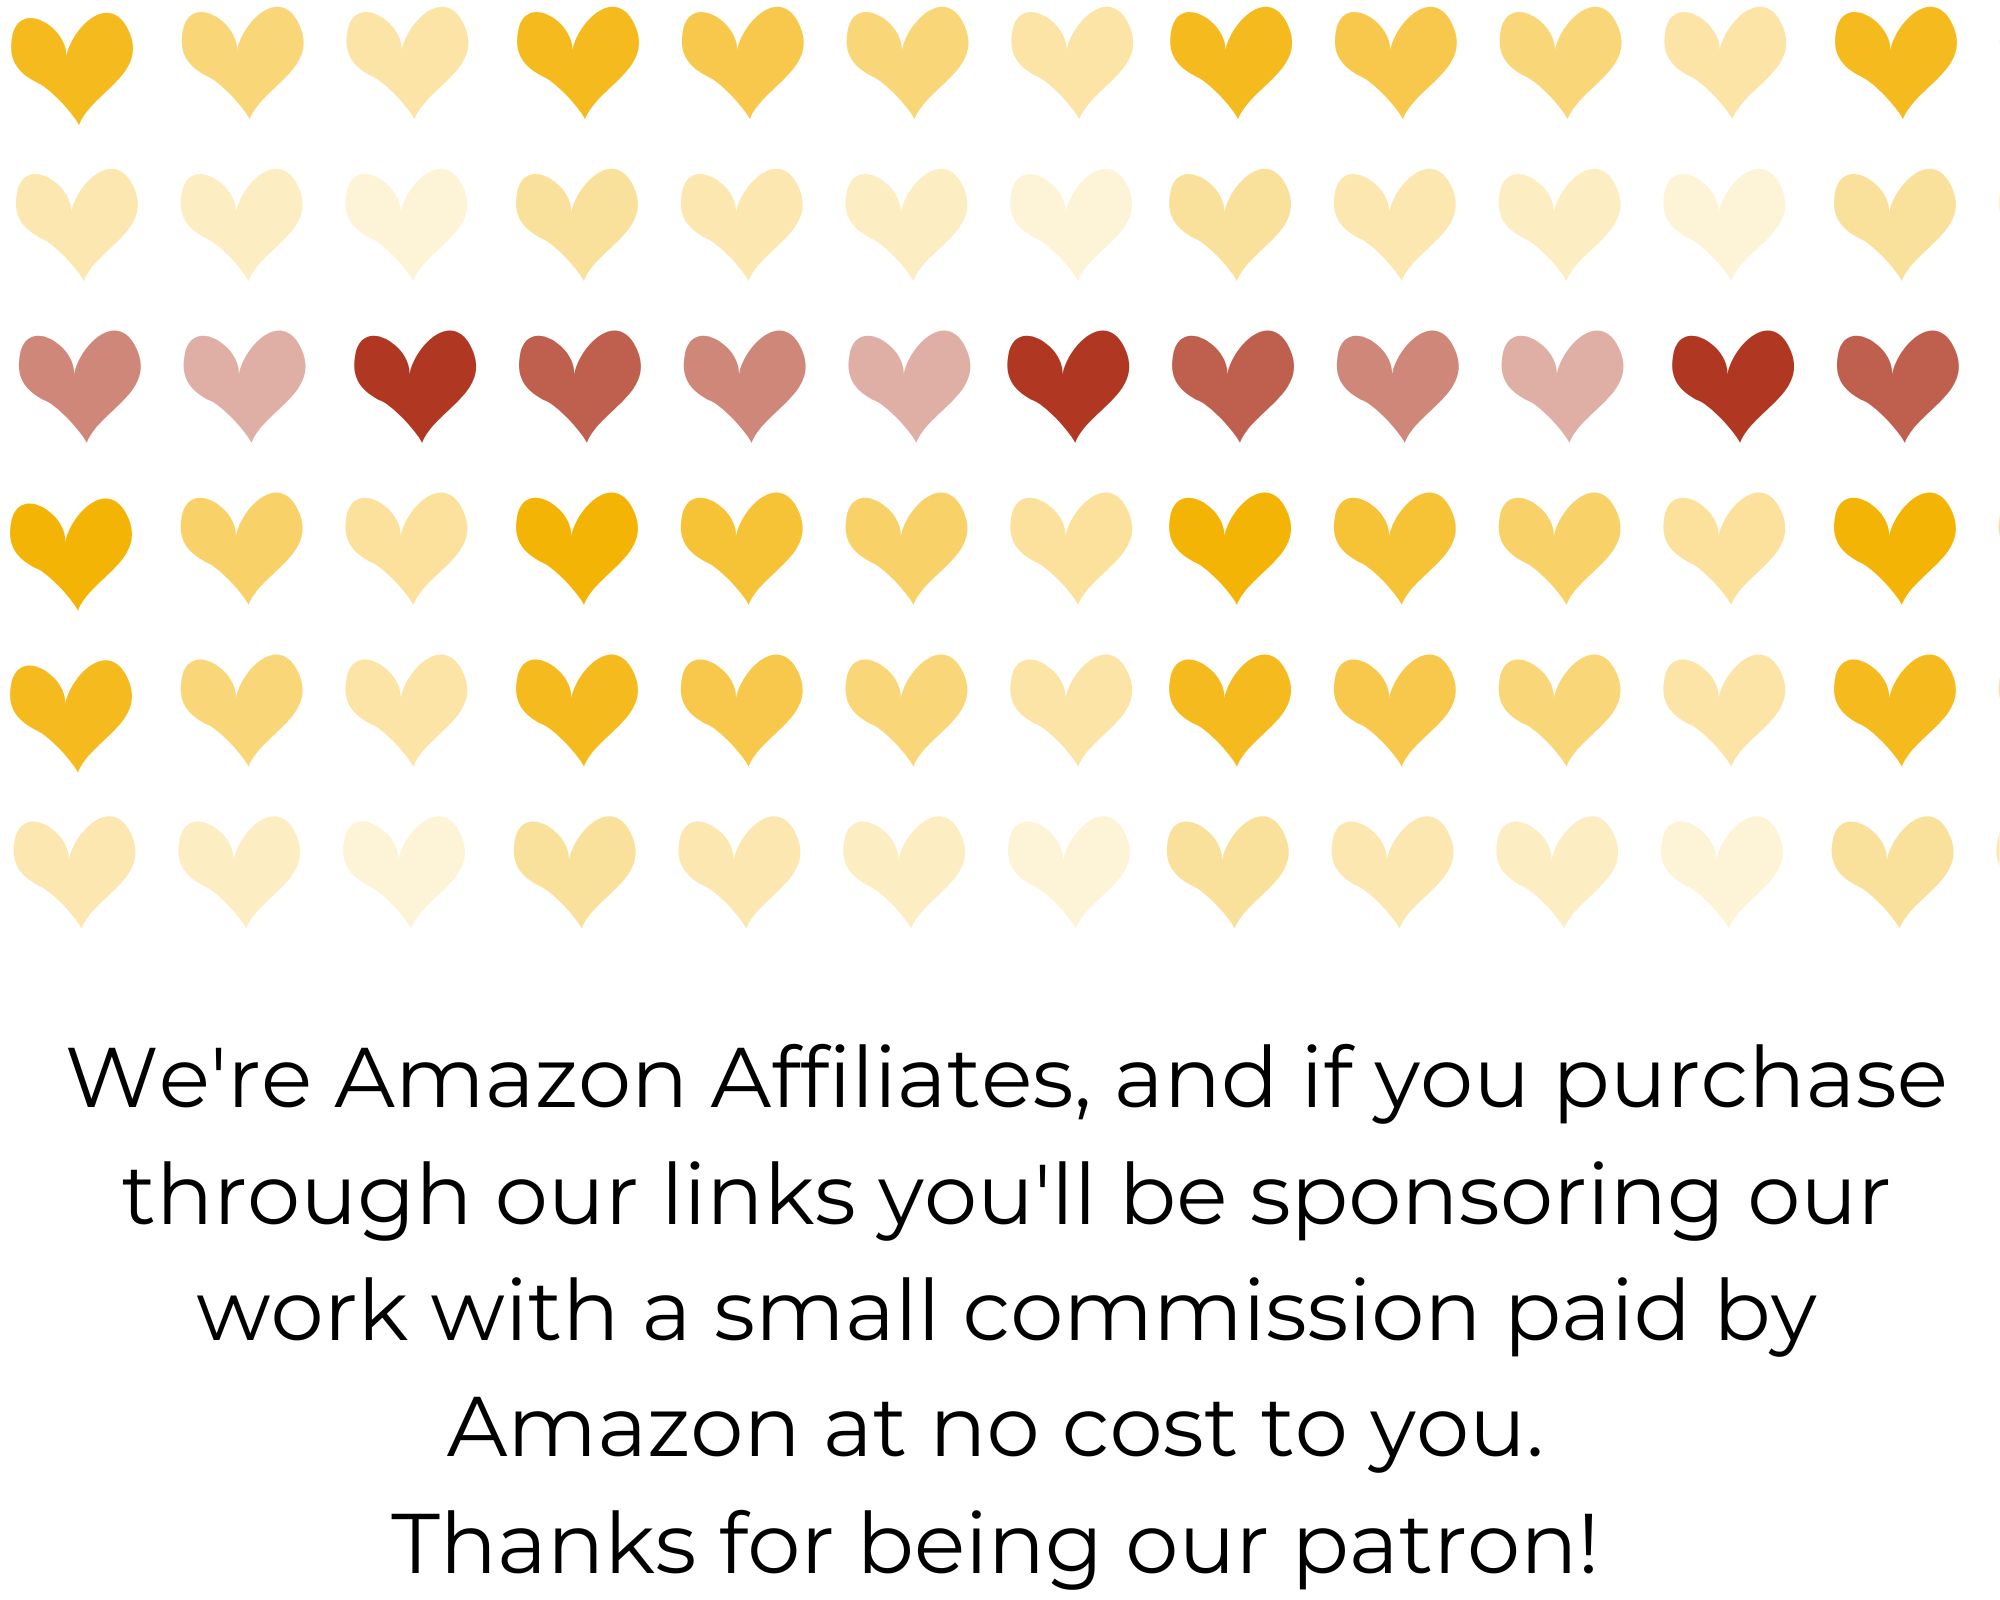 Amazon affiliate link disclosure with gold and burgandy hearts